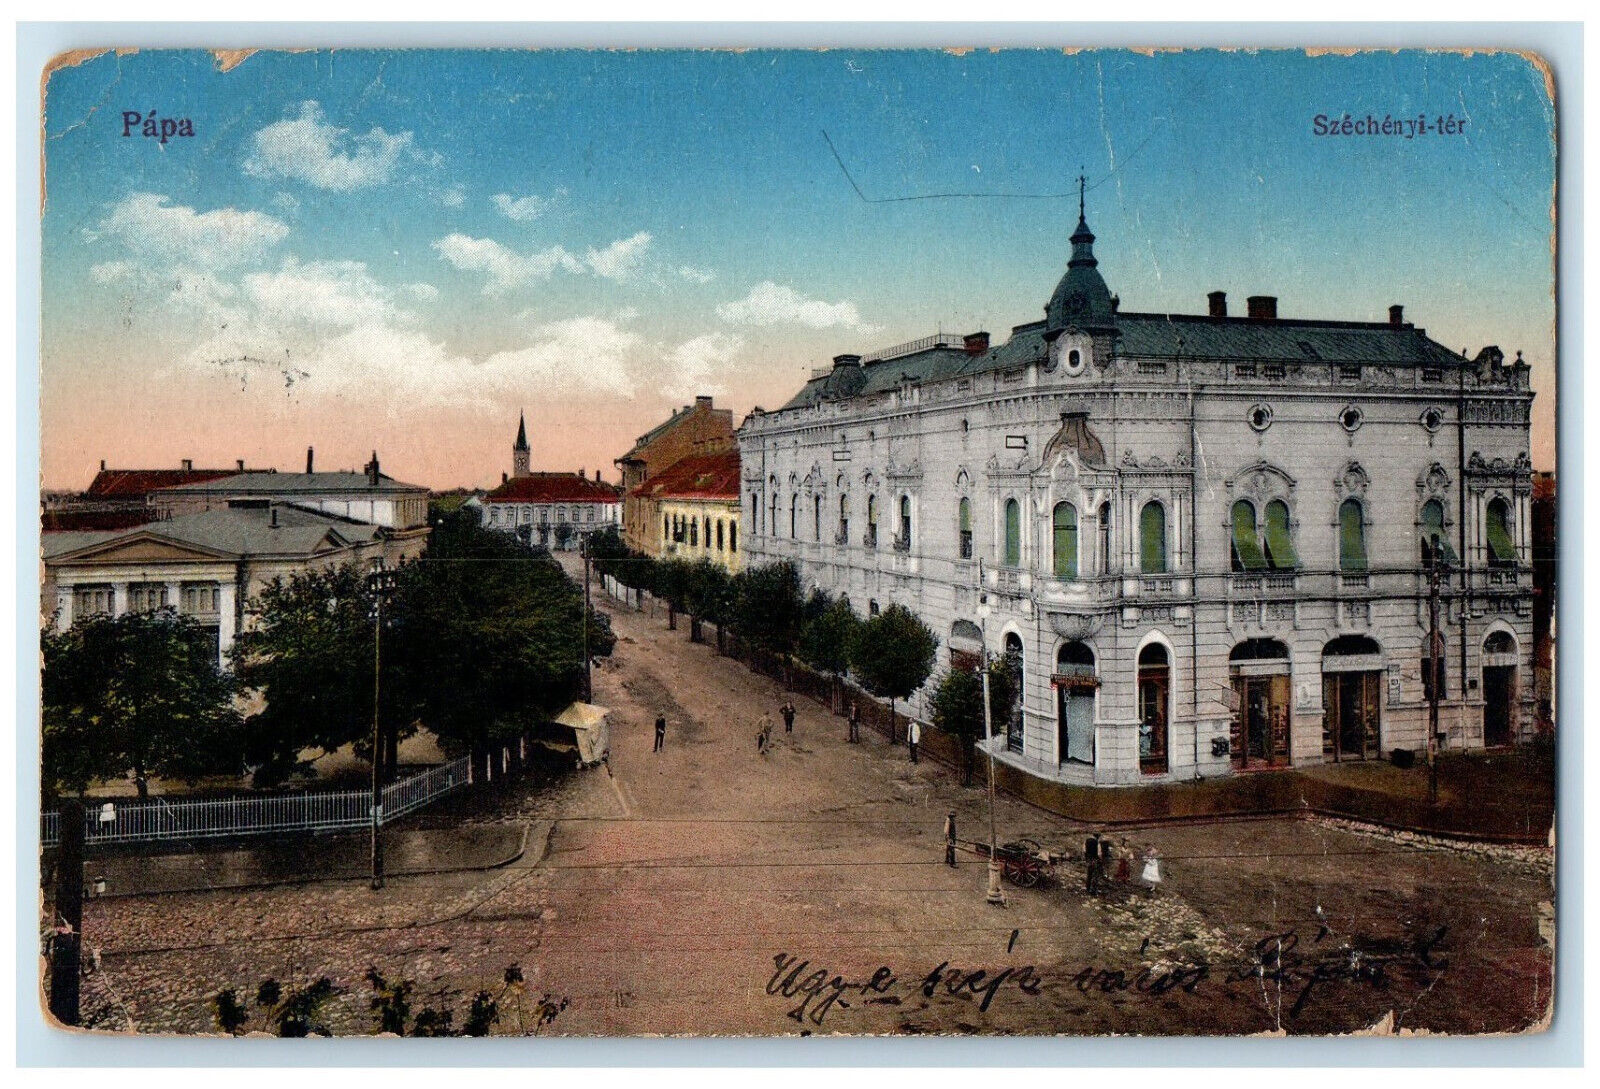 1914 View of Road Szecheayi-ter Papa Hungary Antique Posted Postcard